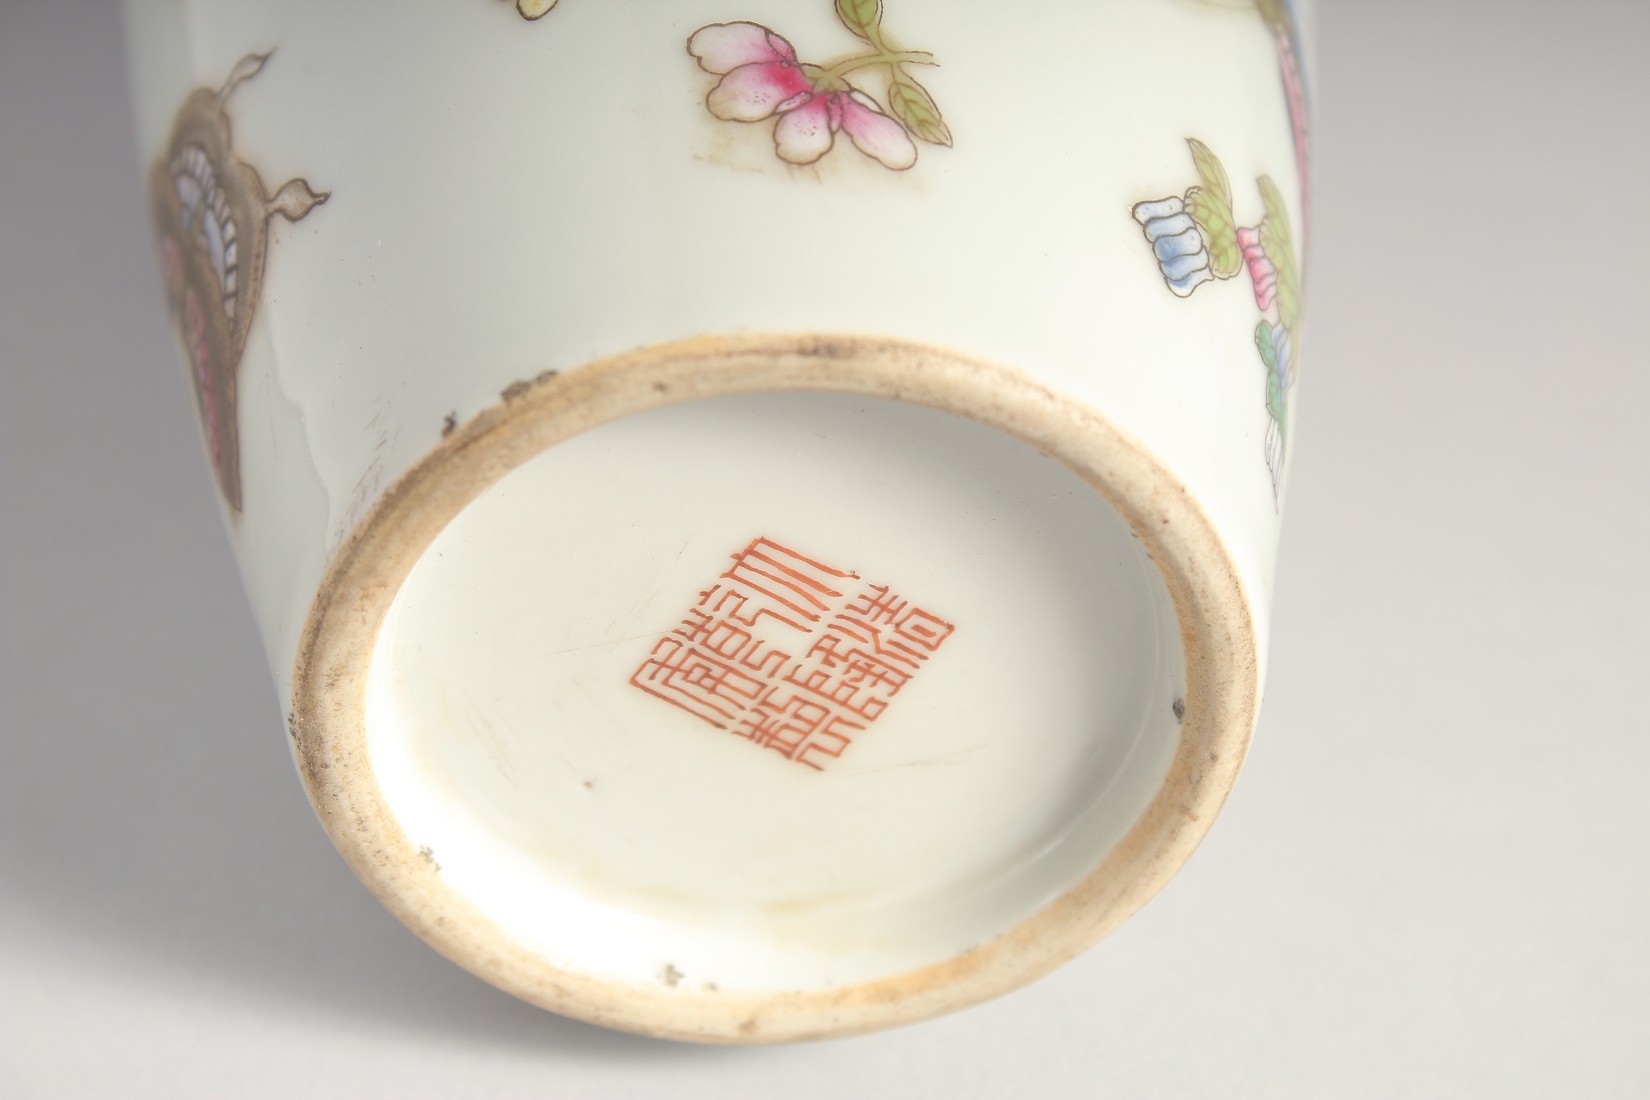 A CHINESE FAMILLE ROSE PORCELAIN BUTTERFLY VASE, base with character mark in red, 25cm high. - Image 6 of 6